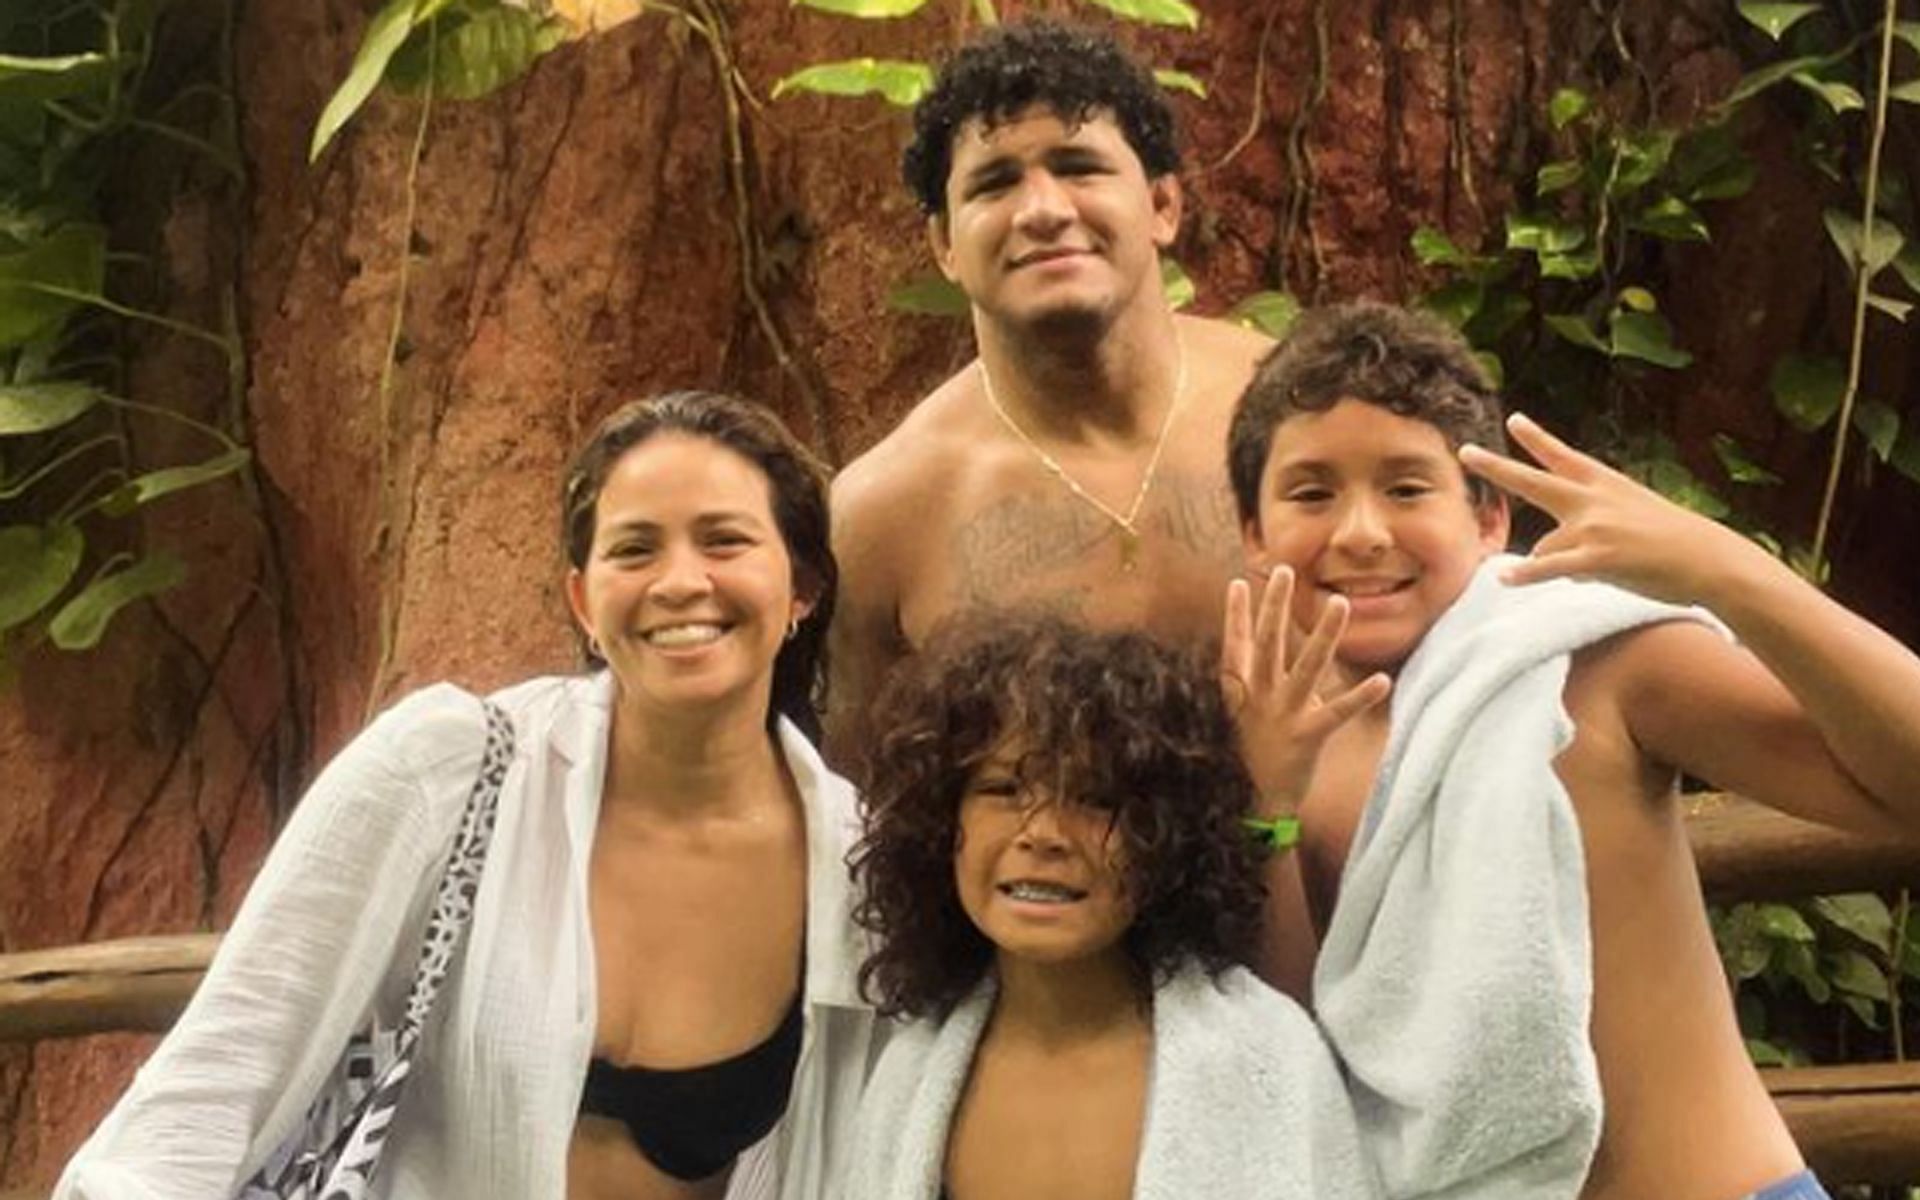 Gilbert Burns with his wife and sons [Image Courtesy: @brunaburns Instagram]